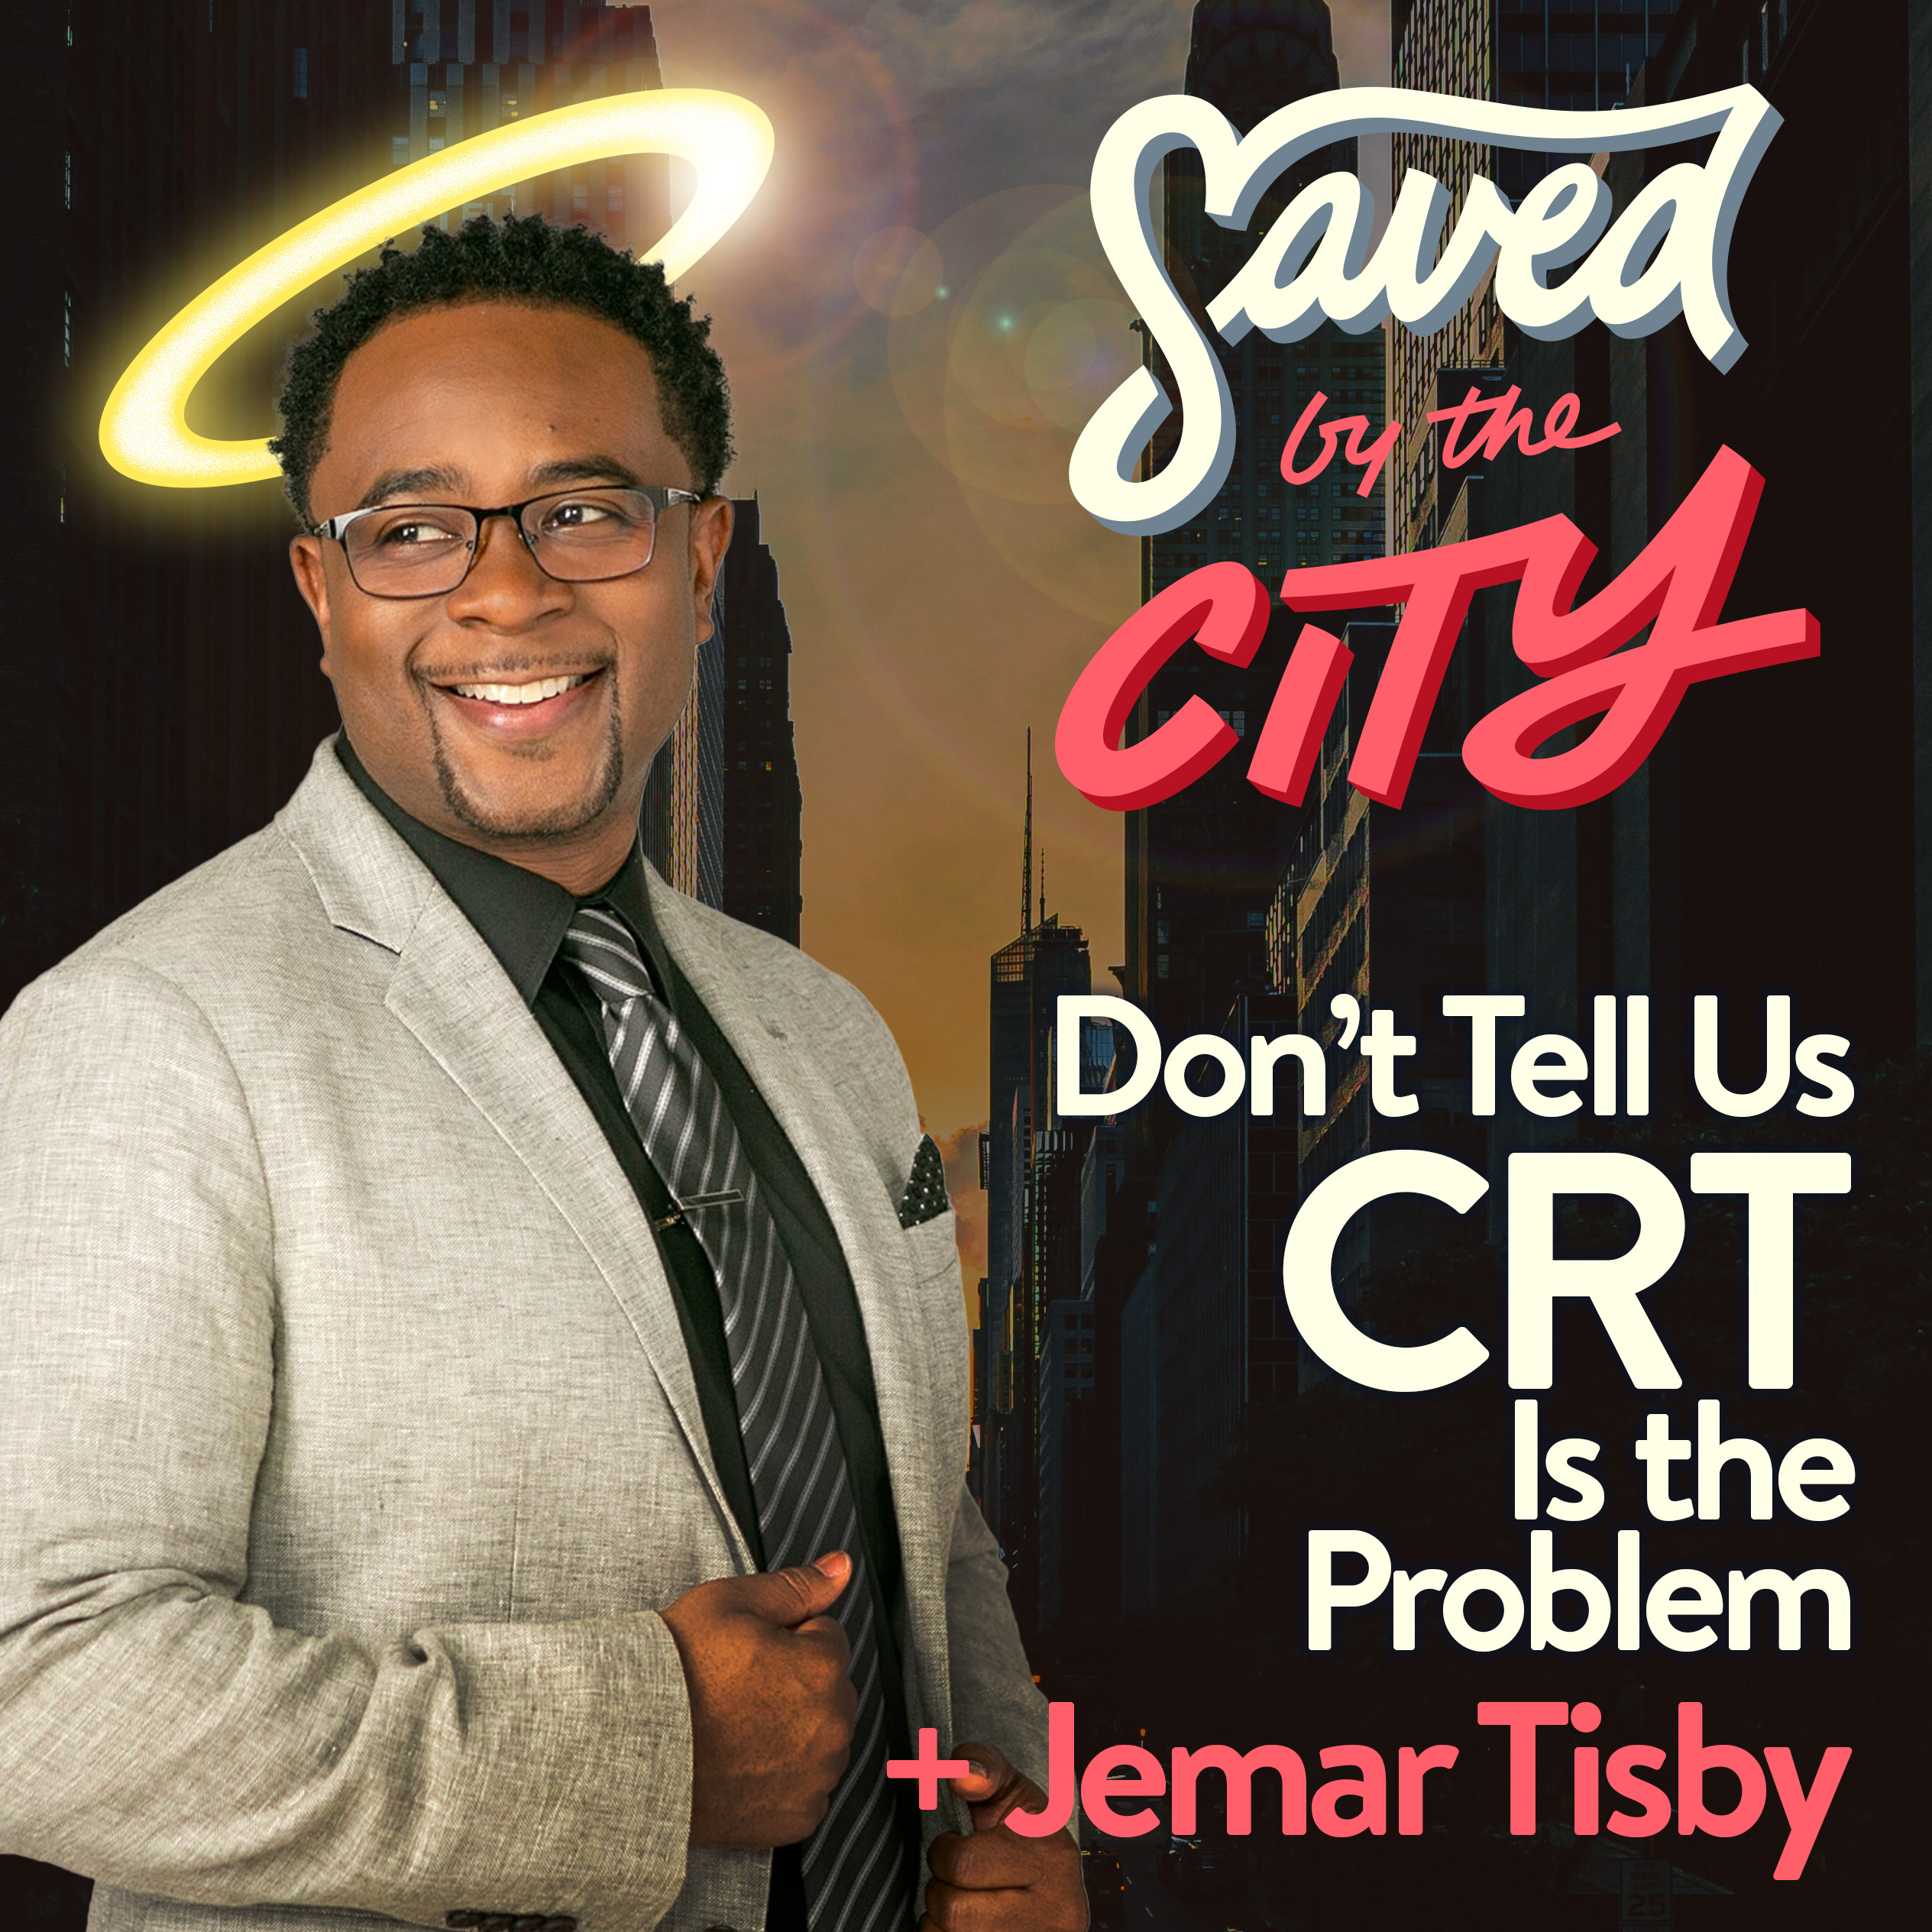 “Saved in the City” Podcast Talks to Jemar Tisby About Critical Race Theory and Racial Progress